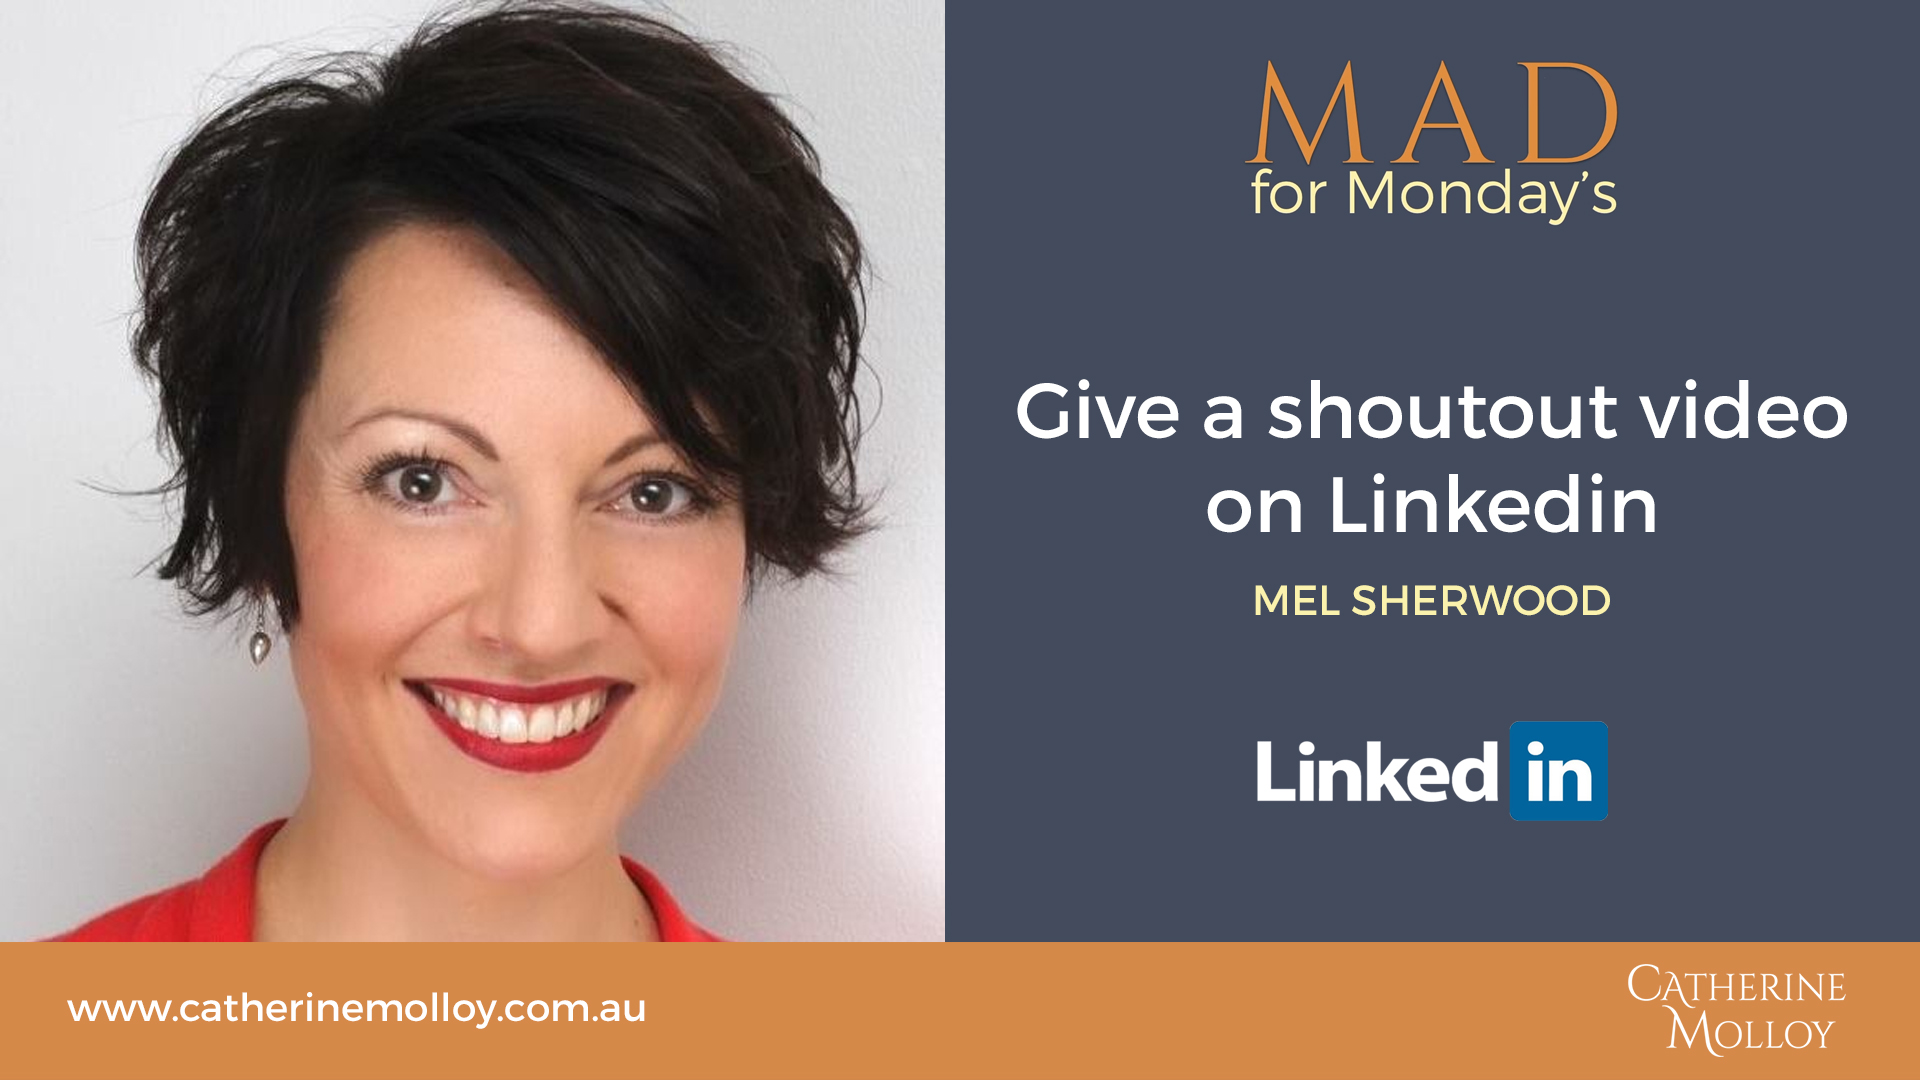 MAD for Monday’s – Give a shoutout video on Linkedin